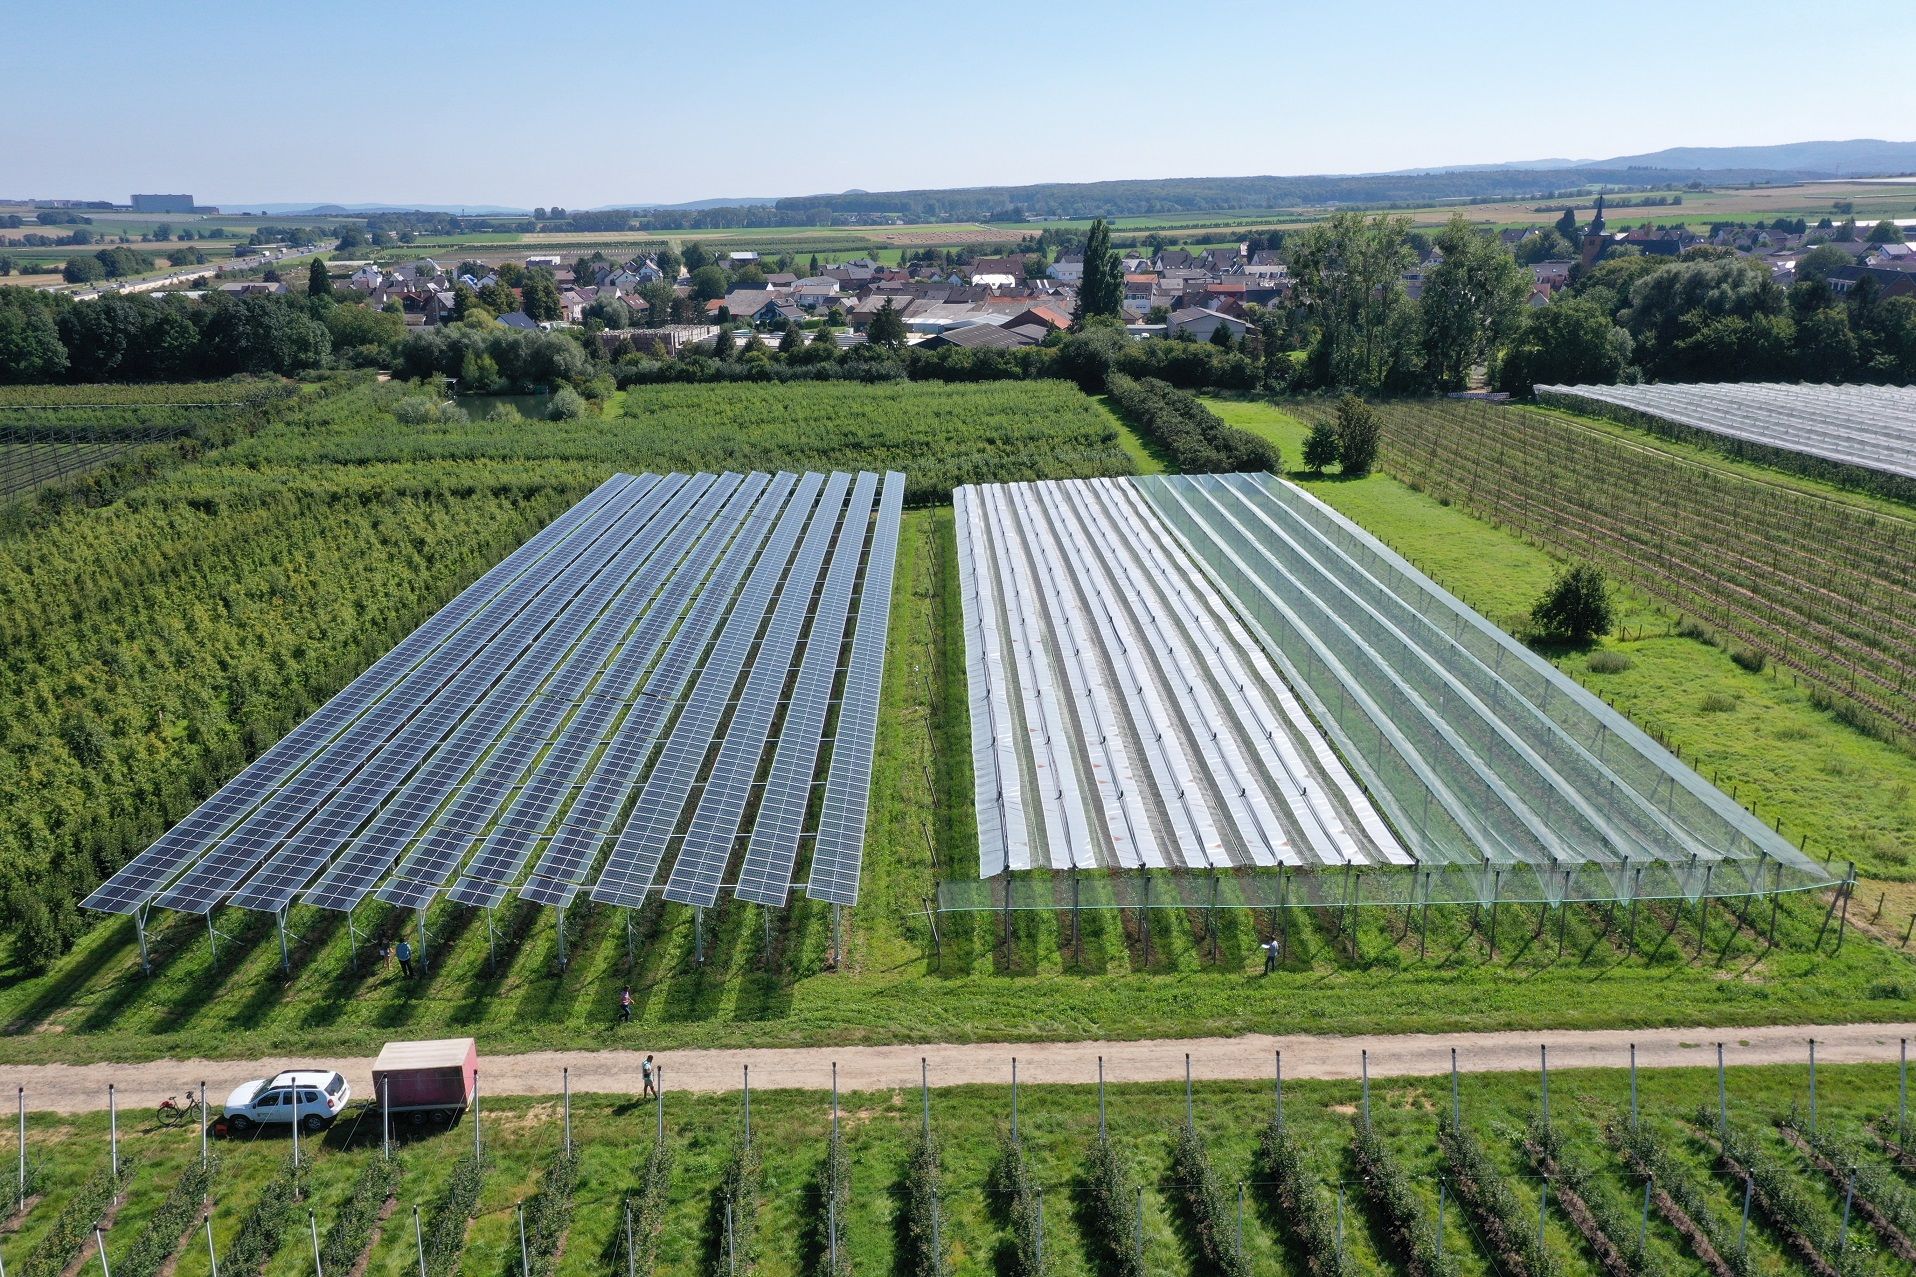 In the project “Agri-PV Obstbau”, a variety of solar module technologies (left) and conventional crop protection systems (right) are being tested.